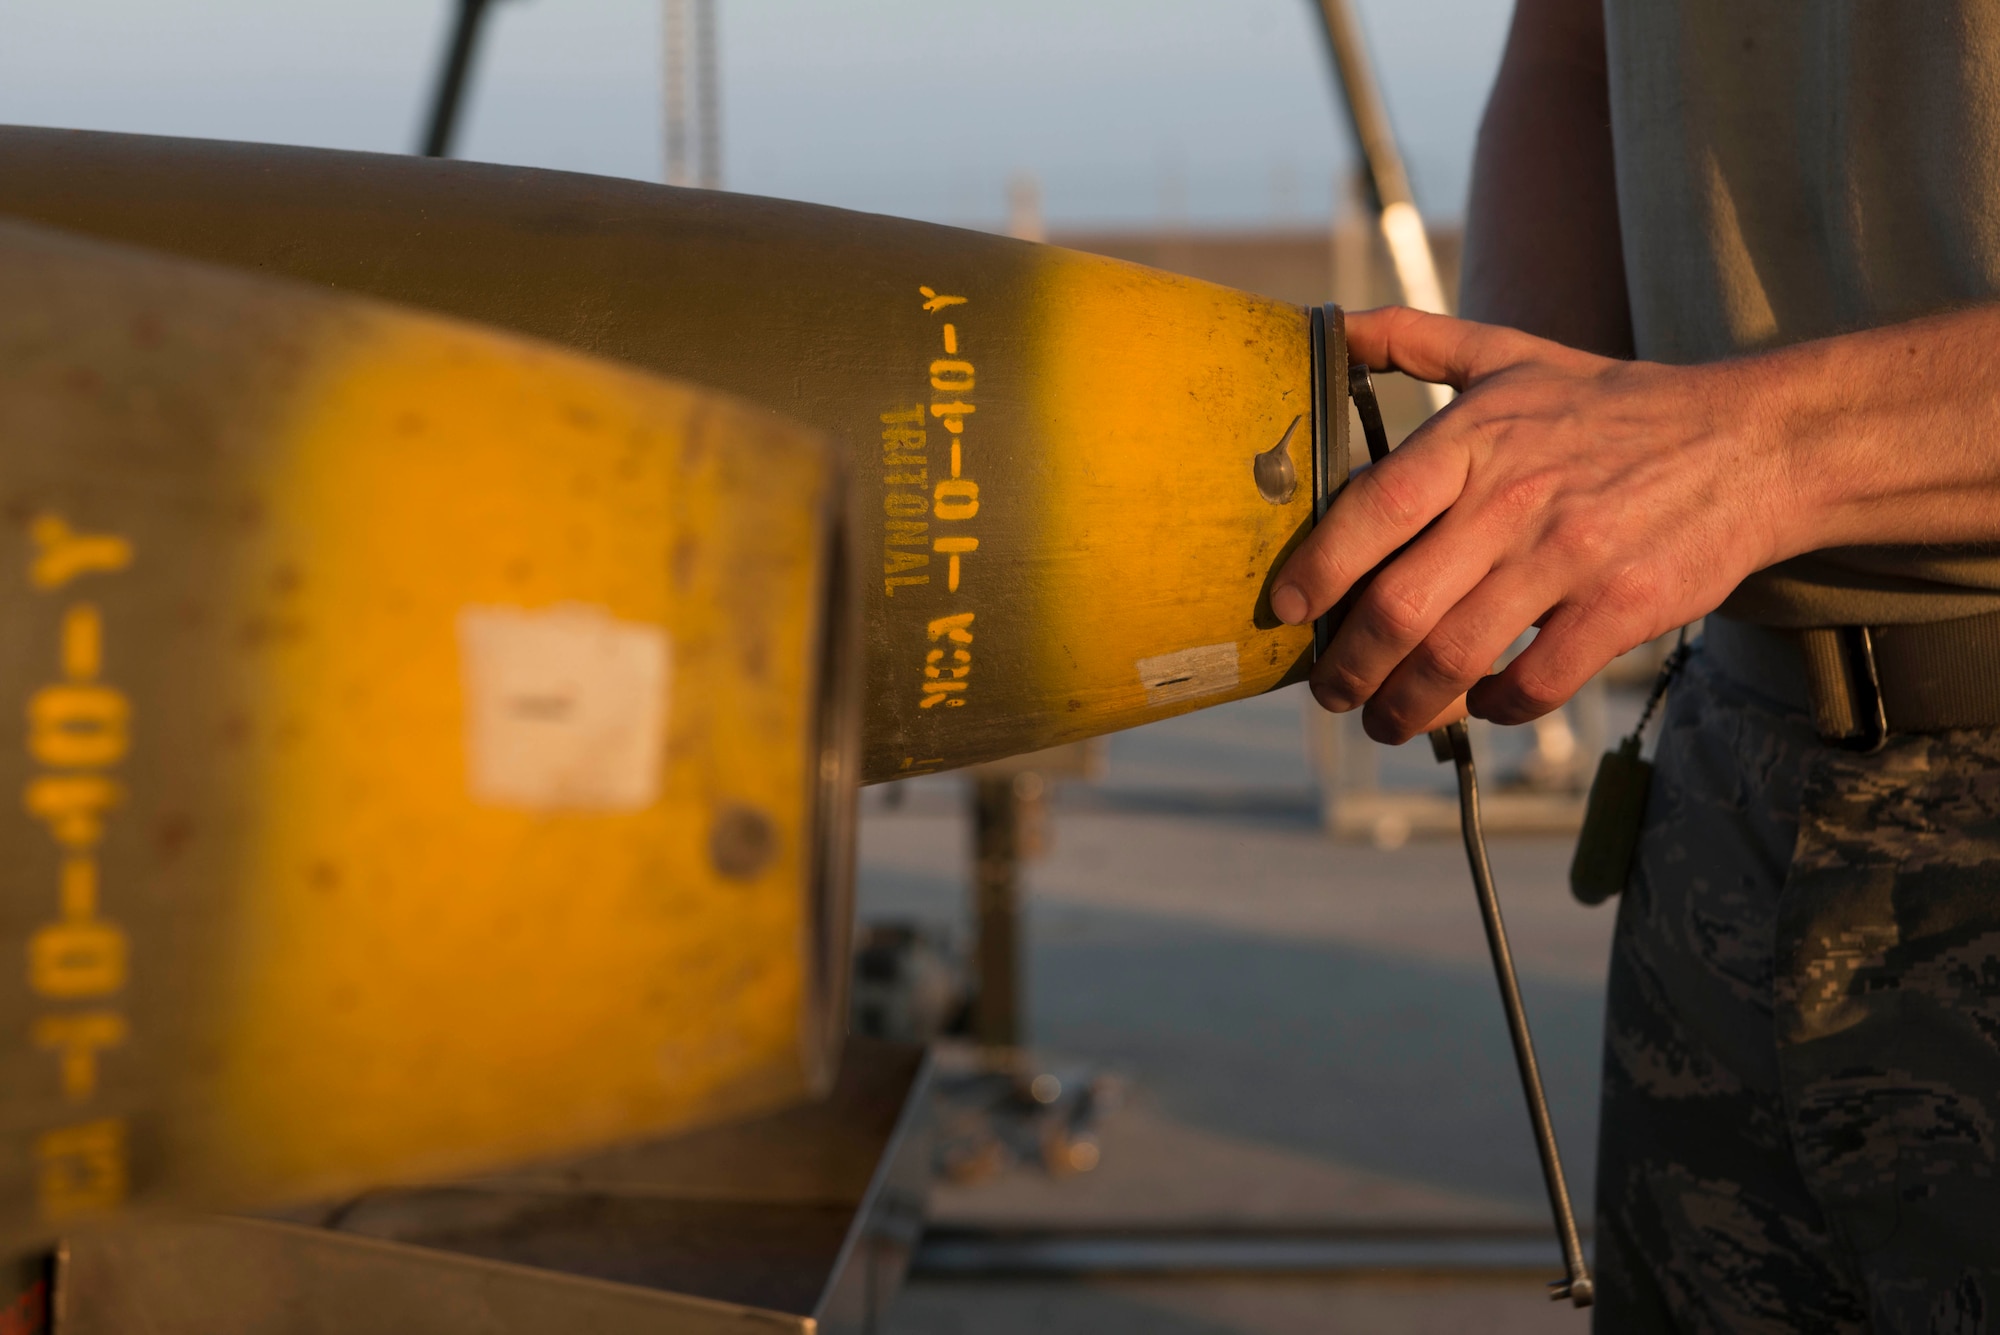 U.S. Air Force Staff Sgt. Shadrach Mchargue, 447th Expeditionary Aircraft Maintenance Squadron munitions systems specialist, installs a nose support coupler on a GBU-12 Paveway II laser-guided bomb Aug. 8, 2016, at Incirlik Air Base, Turkey. Munitions systems specialists receive, identify and store guided and unguided non-nuclear munitions. (U.S. Air Force photo by Senior Airman John Nieves Camacho)